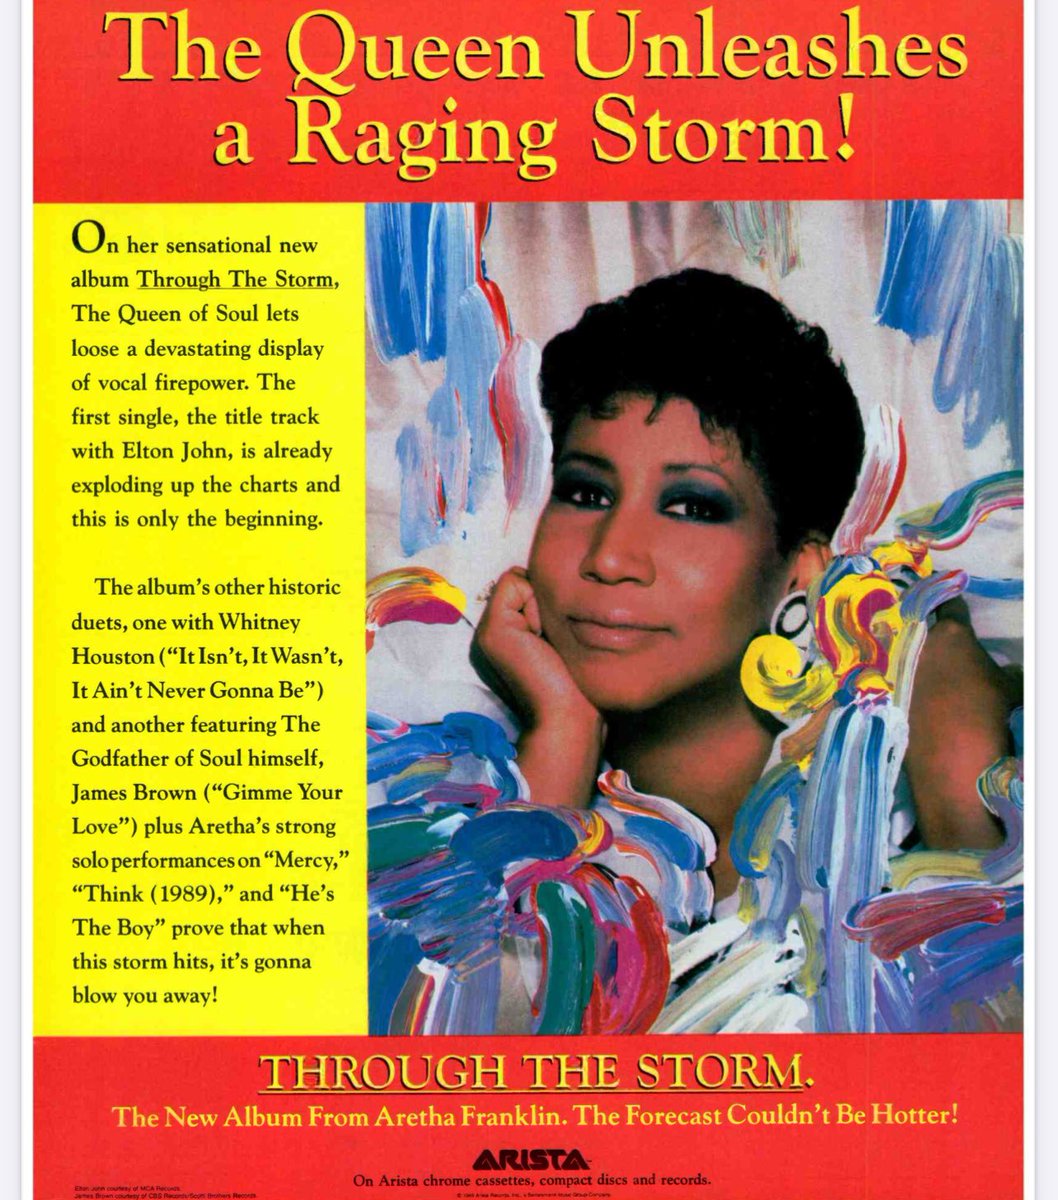 In the spring of 1989, a storm blew in … #ArethaFranklin released her new album.